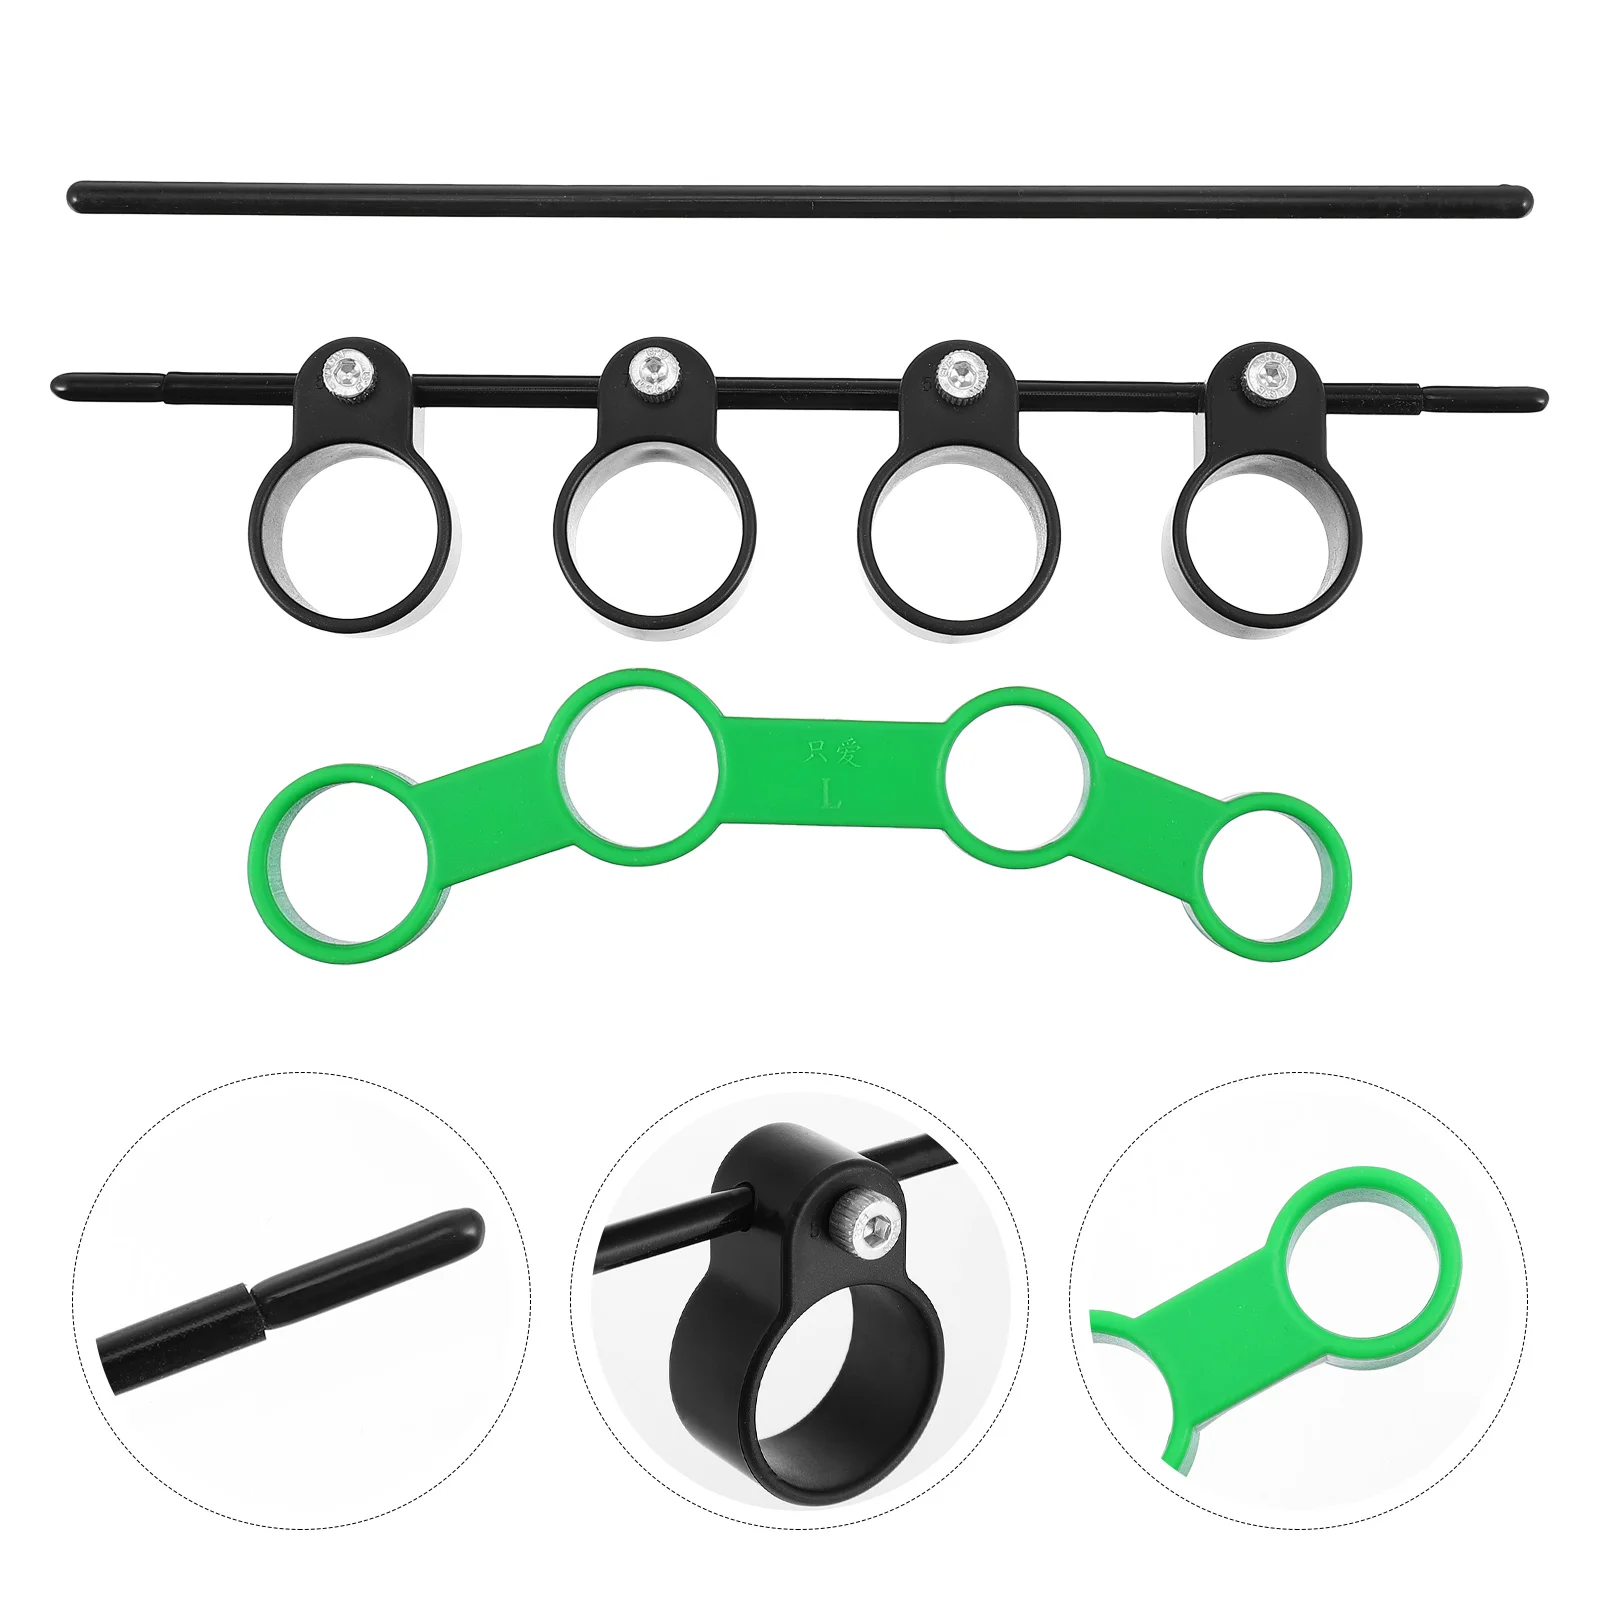 Musical Instrument Finger Expander Guitar Training Supply Expansion Trainers Tool Beginner Accessories Hand Exerciser hand grips adjustable expander strengthener for trainer power training finger forearms exerciser strength spring wrist device